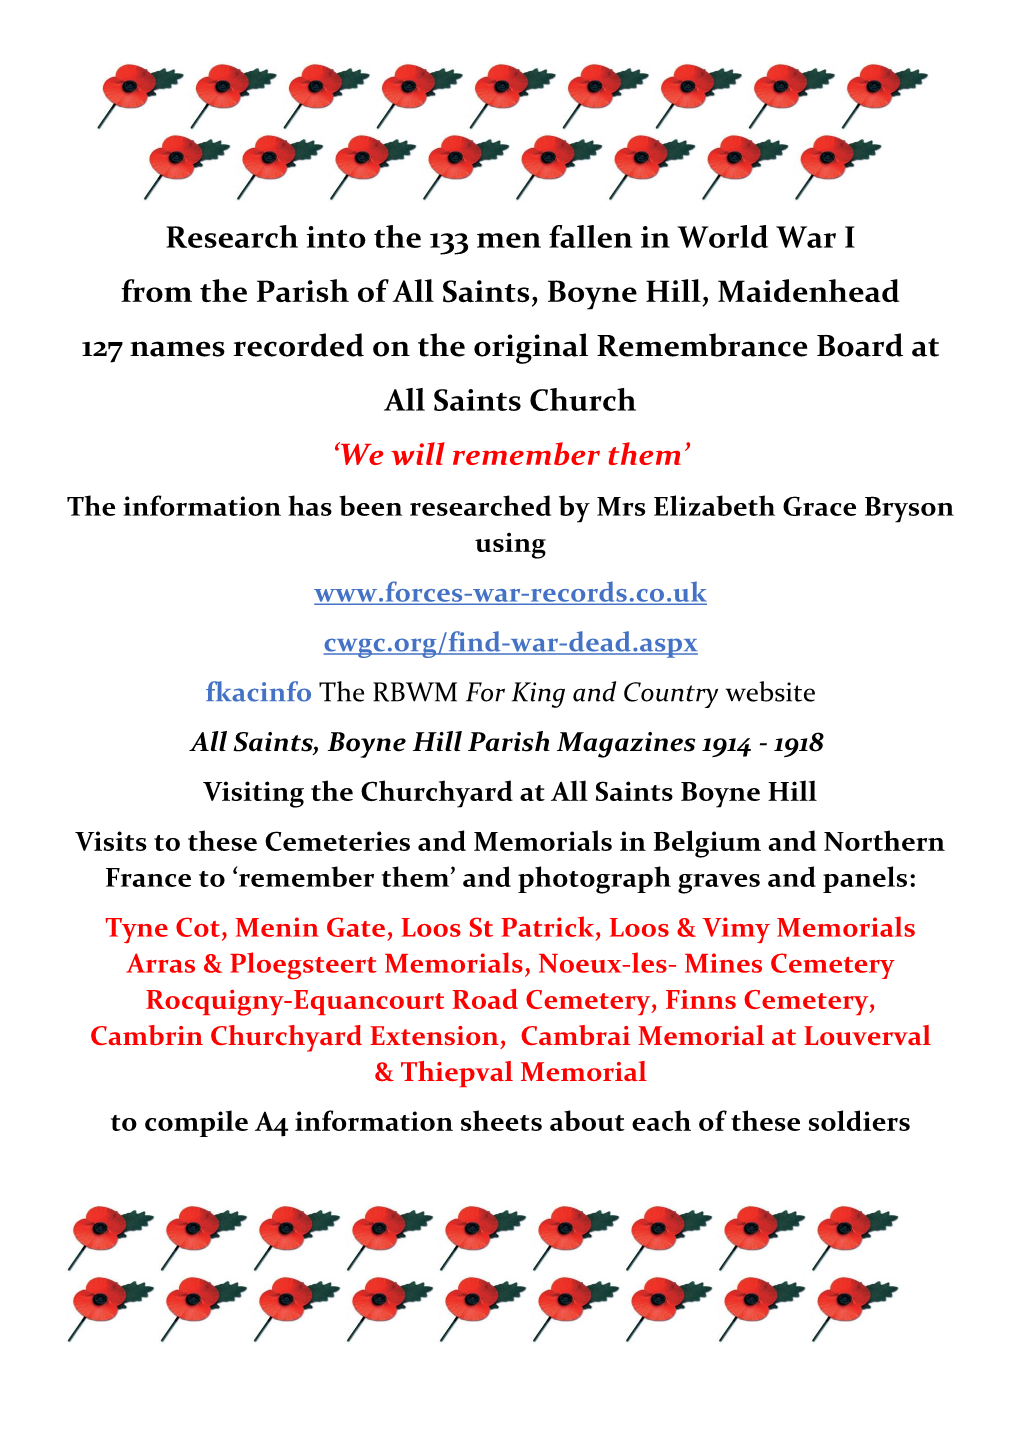 Research Into the 133 Men Fallen in World War I from the Parish of All Saints, Boyne Hill, Maidenhead 127 Names Recorded On